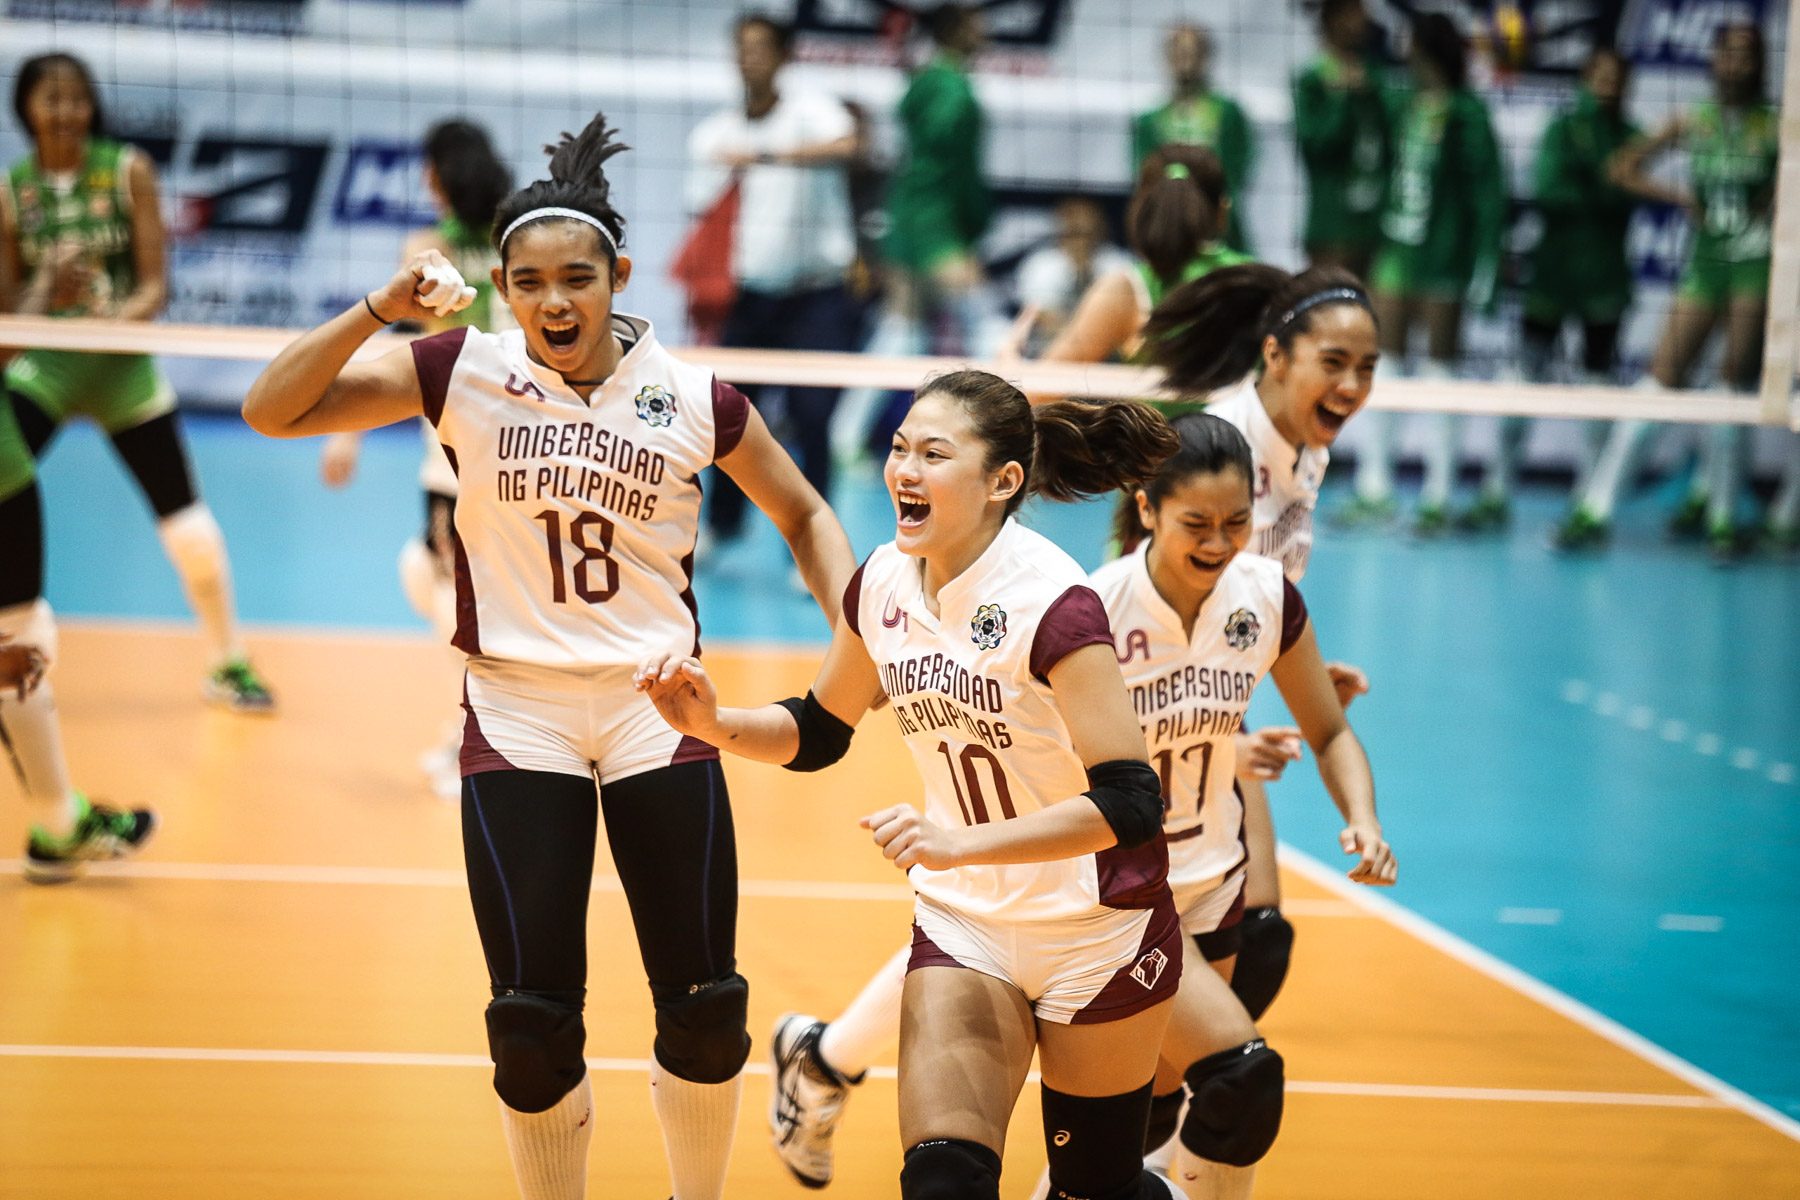 Tiamzon, Lady Maroons sweep La Salle for share of lead